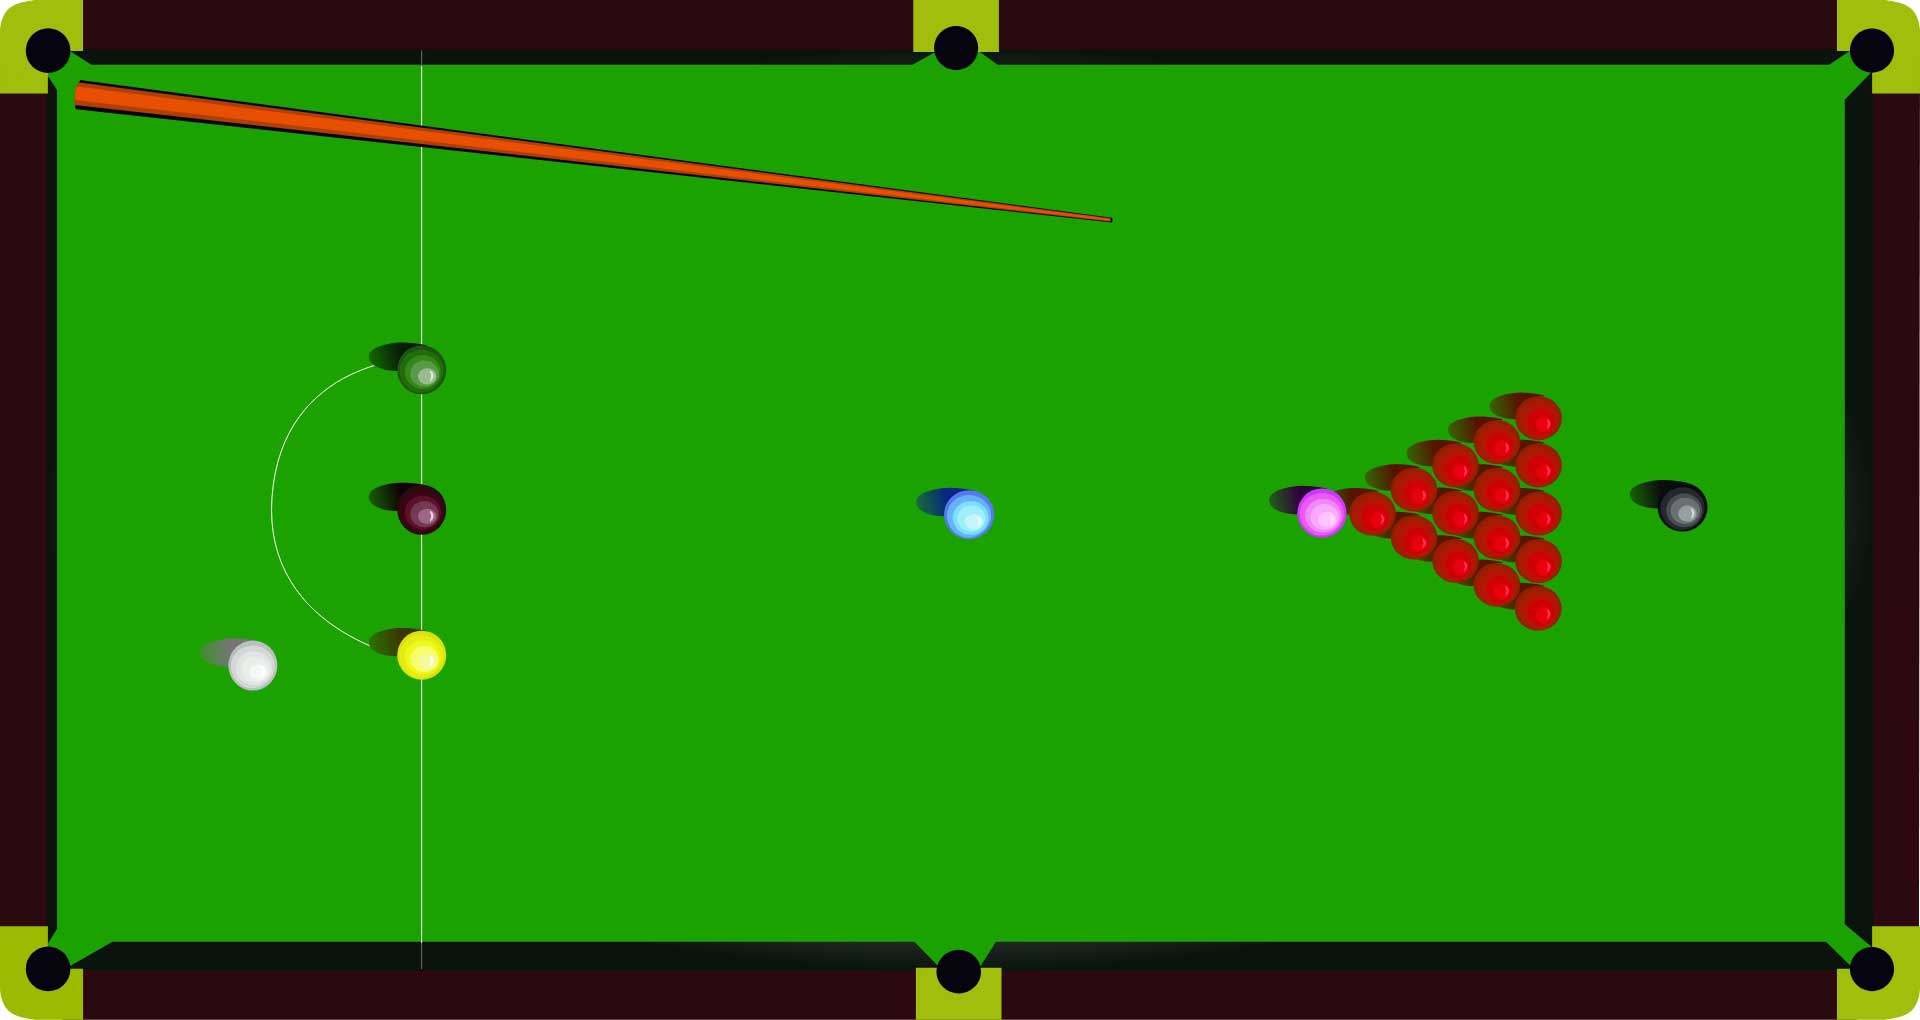 Spectacular opening by Higgins of the 2021 British Open Snooker Championship